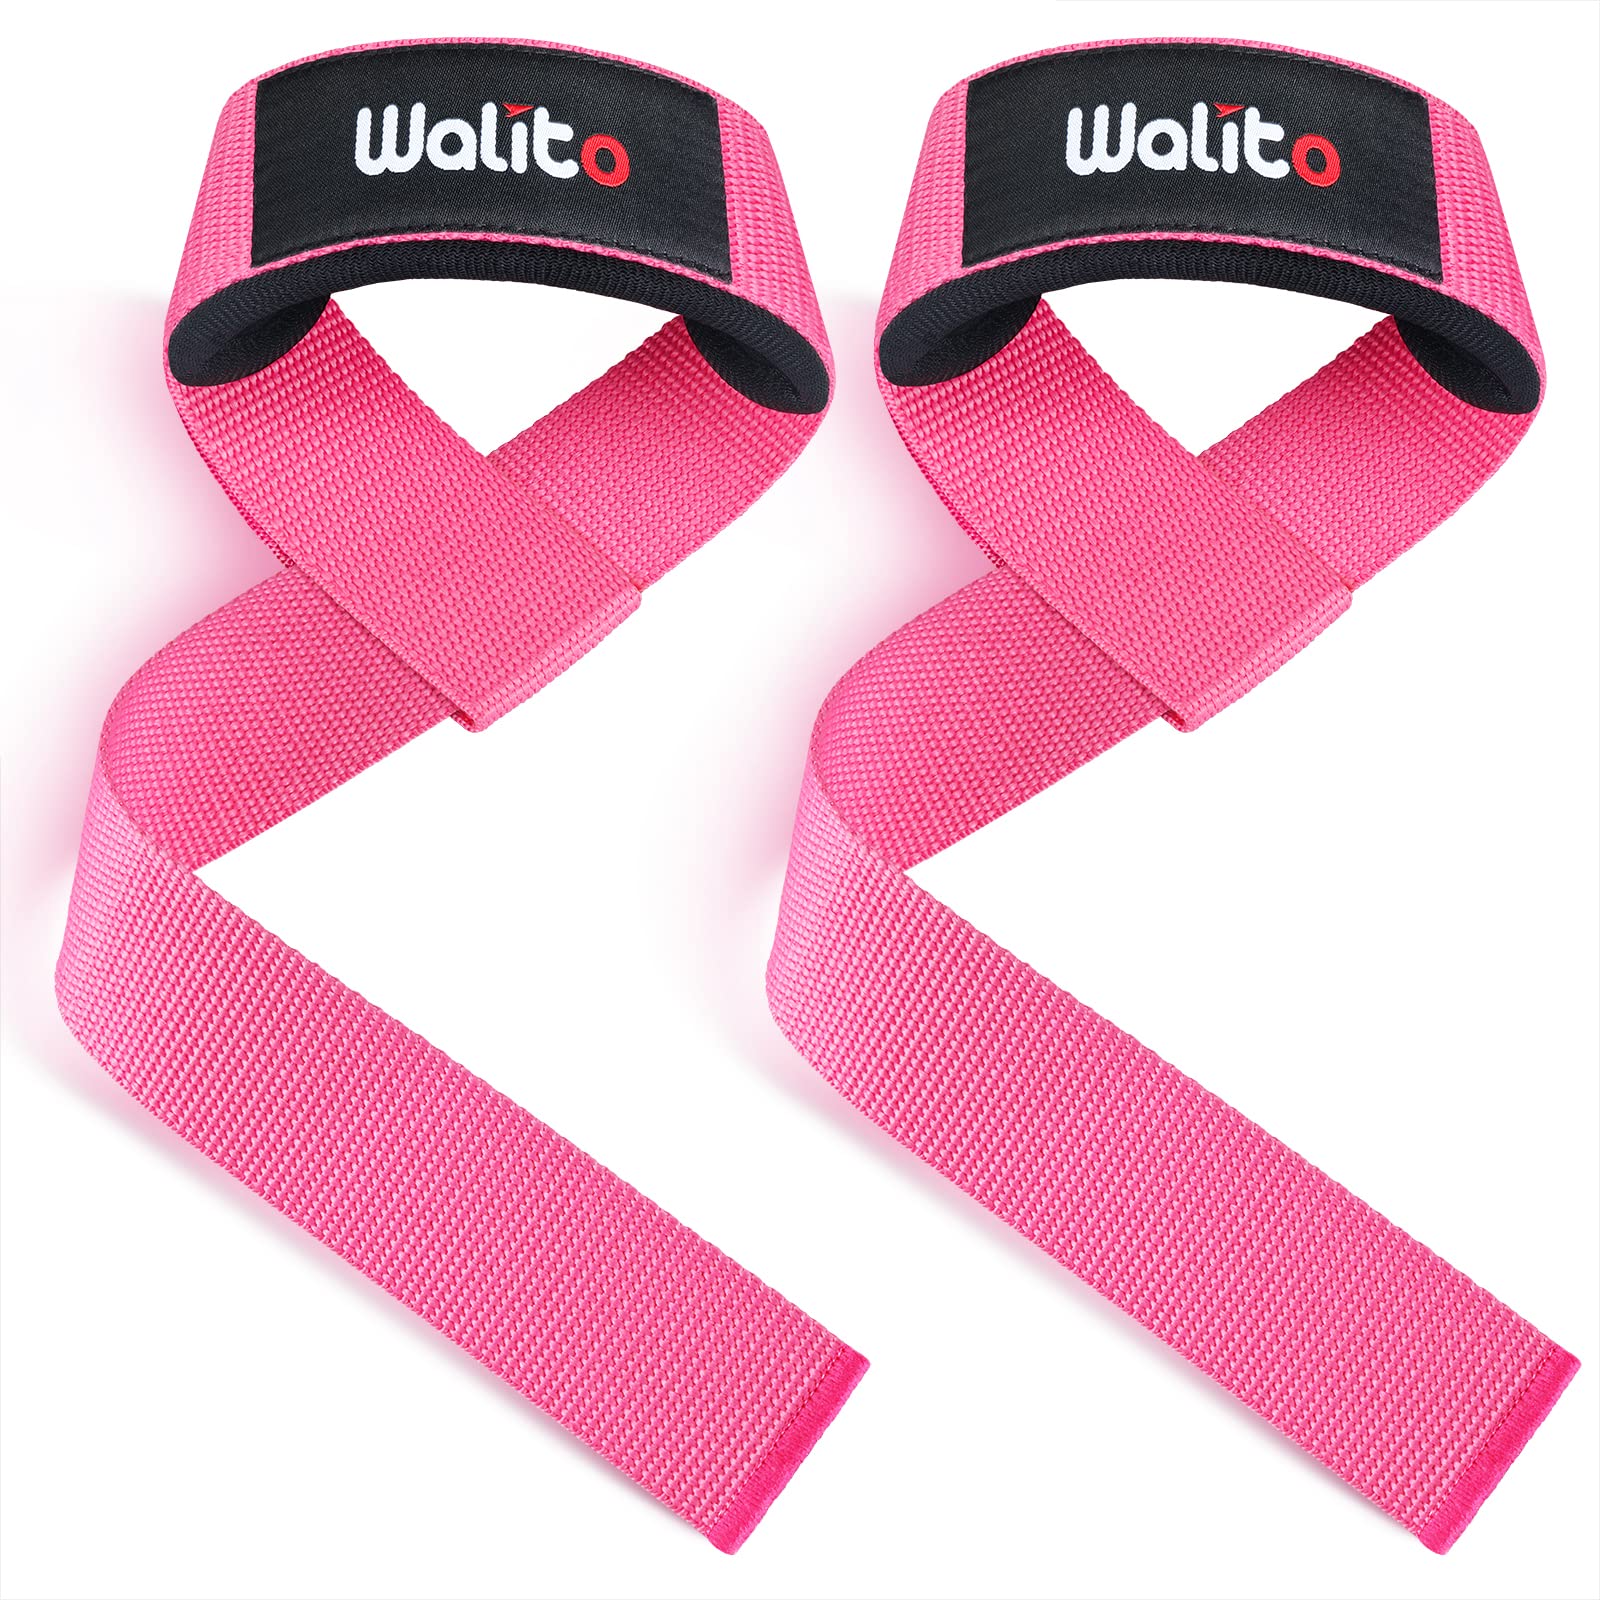 Gym Weight Lifting Straps - 24 Wrist Wraps Wrist Straps for Weightlifting Men & Women, Home Gym Deadlift Straps with Thick Protection Pad for